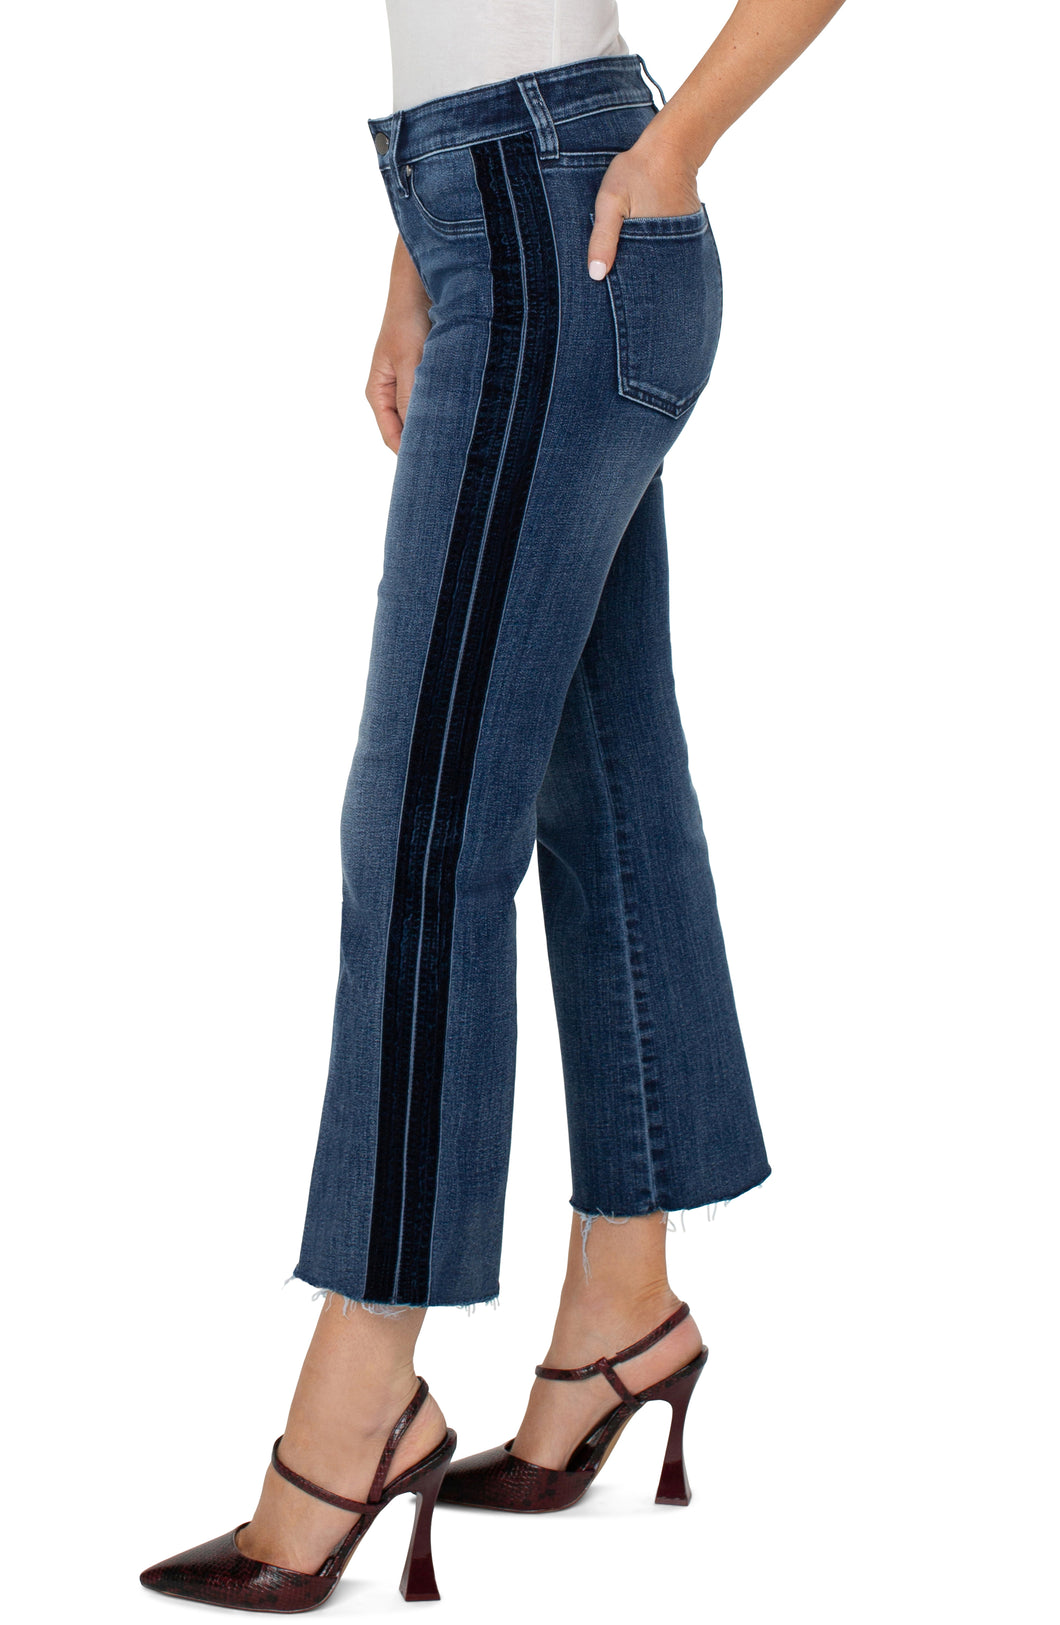 Our Hannah Crop Flare combines vintage inspiration with contemporary detailing, boasting a velvet trim for a modernized look. The cut hem of the medium washed denim elongates the silhouette while elevating the style. Make a statement and match it with the coordinating Denim Jacket for a complete ensemble.  Color- Gilmore; dark blue with fading. 27” Inseam. Mid-rise. Velvet trim down the leg. Set-in waistband with belt loops. 5-Pocket styling details. Zip-fly and single logo button closure.